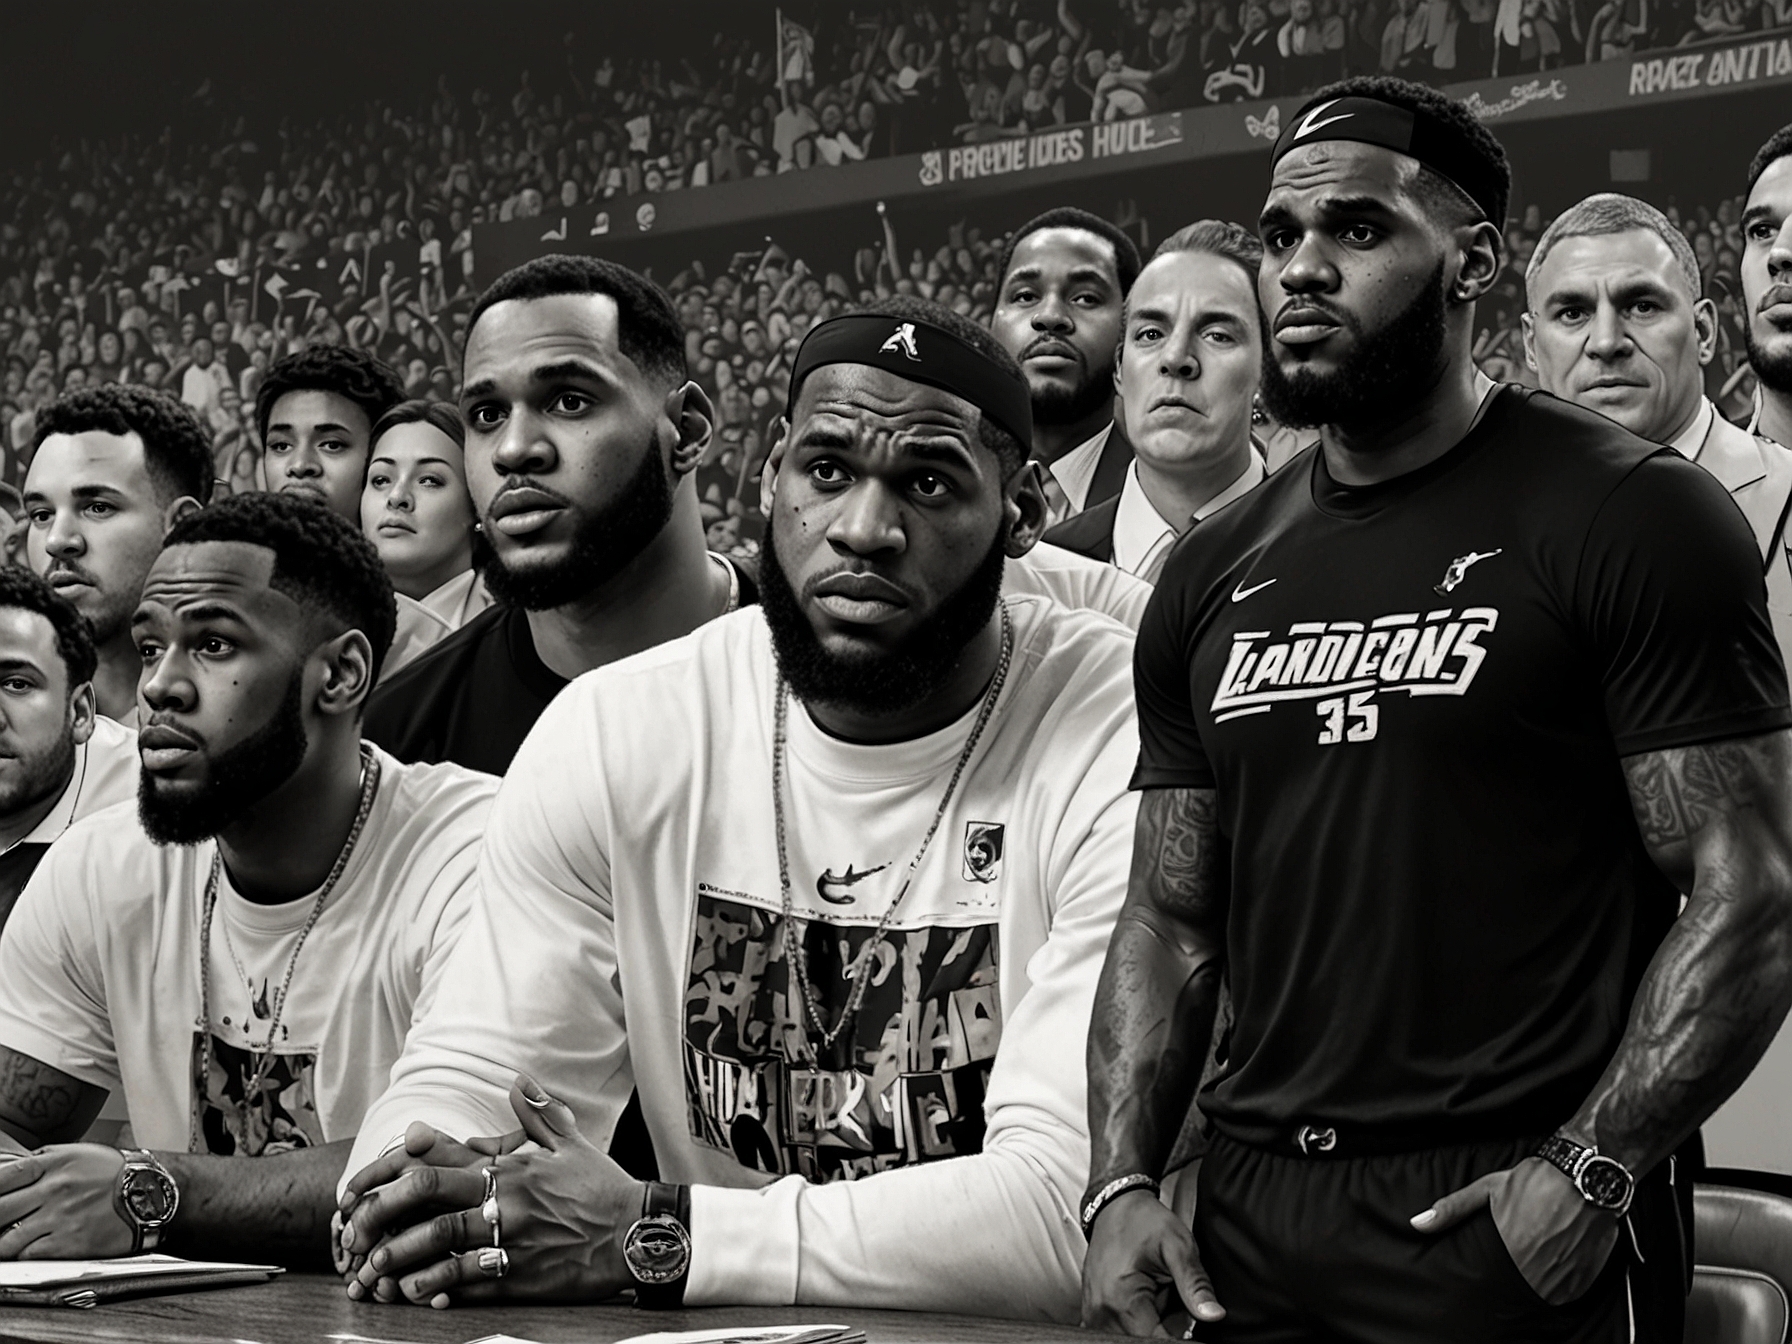 A social media graphic featuring viral clips and memes of the press conference groan, showcasing the widespread online reaction and divided opinions on LeBron James' career and future.